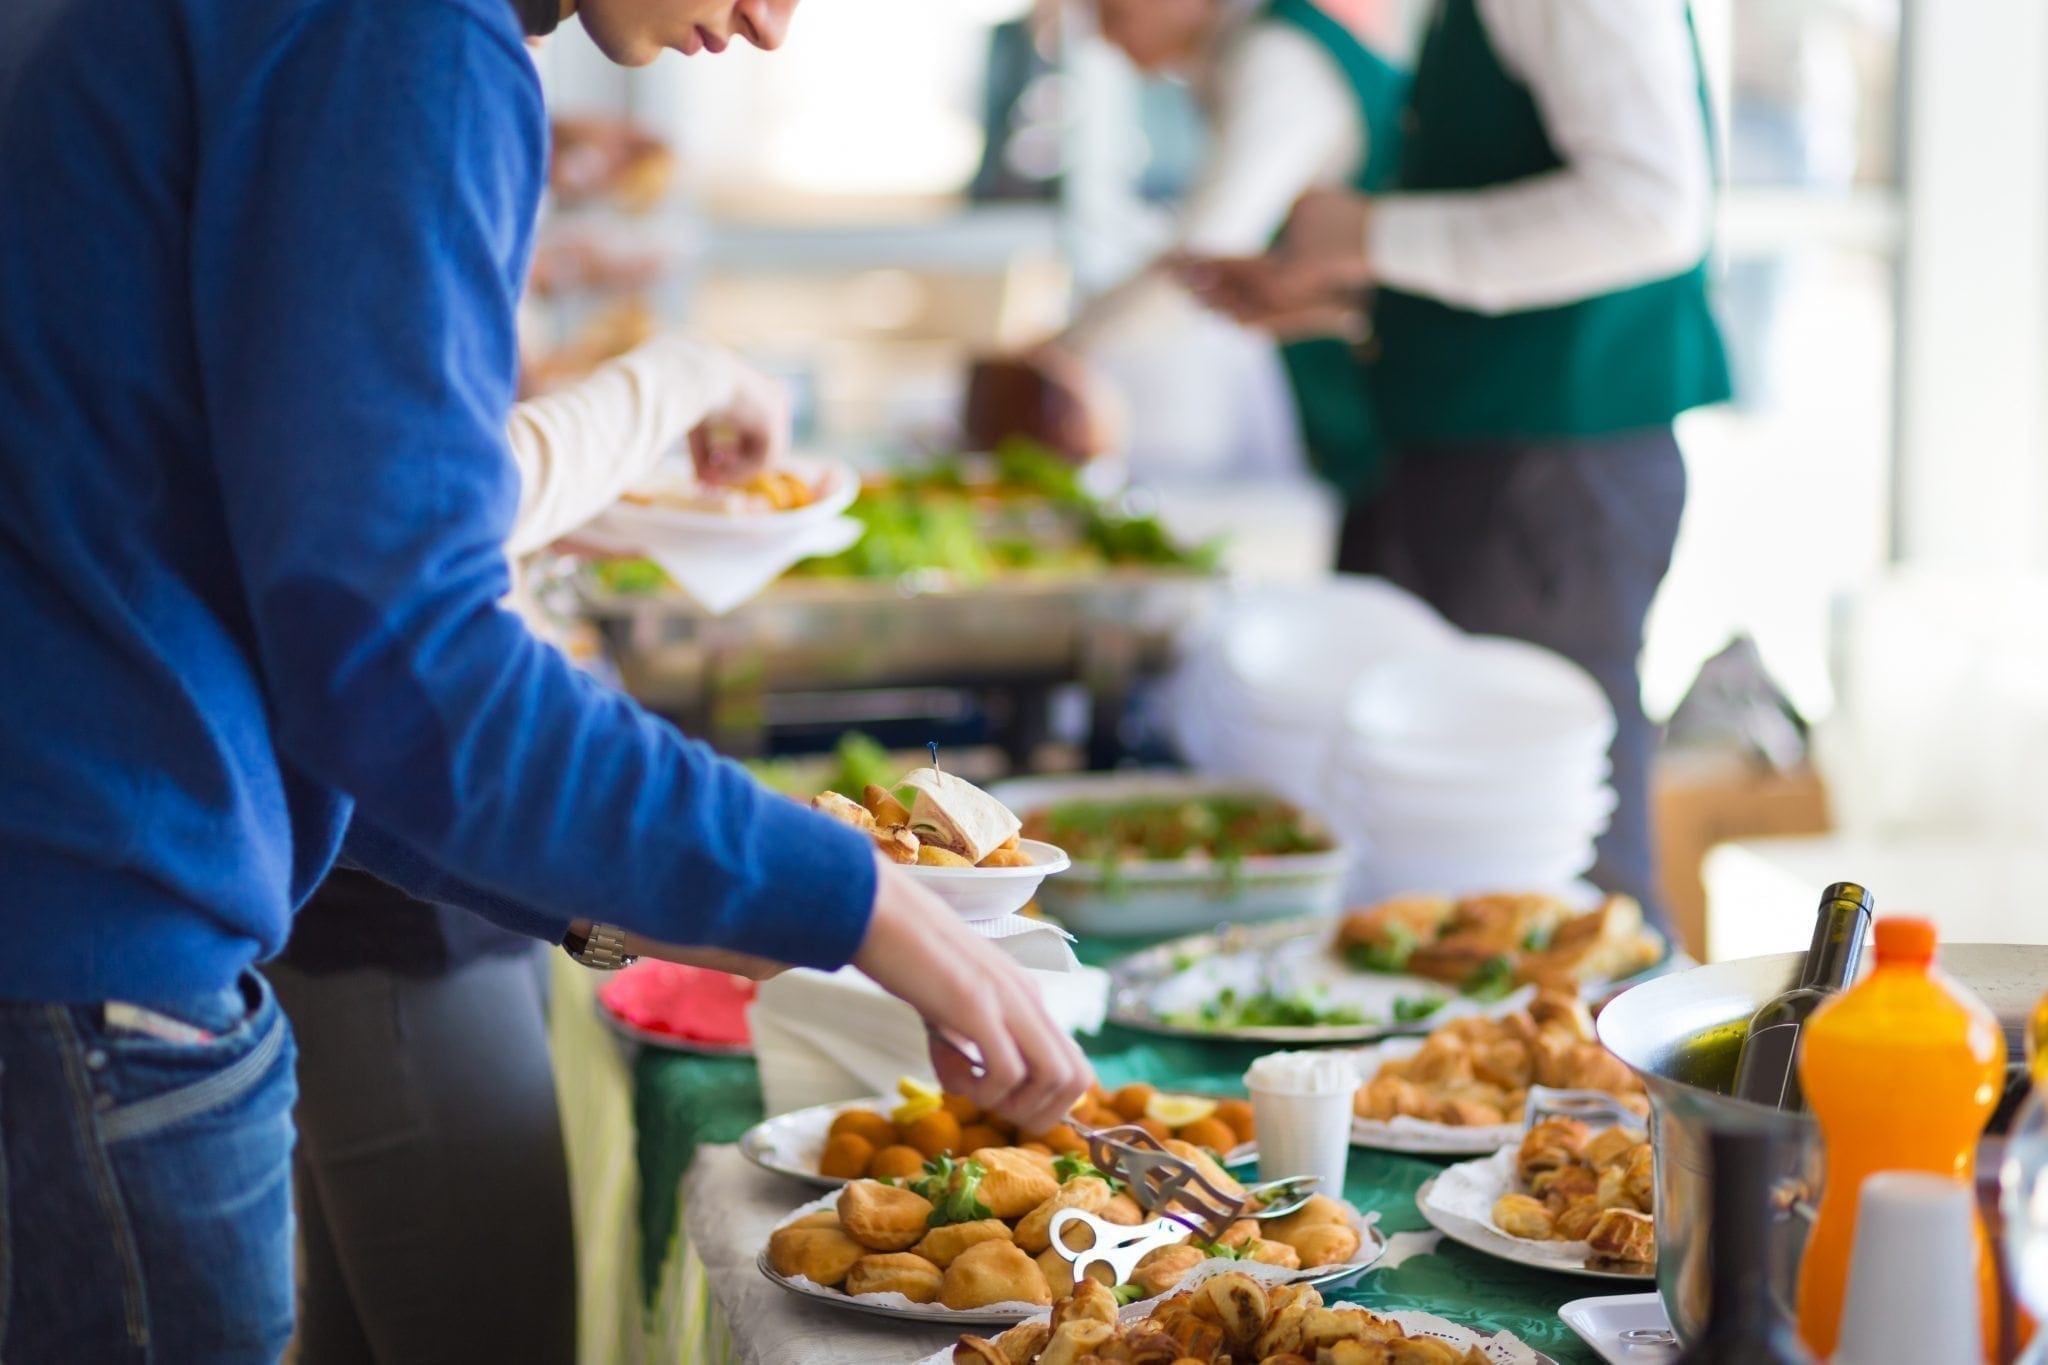 People are gathered around a buffet table selecting various foods. Plates of appetizers, main dishes, and bowls of salads are visible, along with disposable plates stacked at one end. Some individuals are serving themselves while others wait their turn, mindful of useful buffet tips for an efficient experience. MyFitnessPal Blog